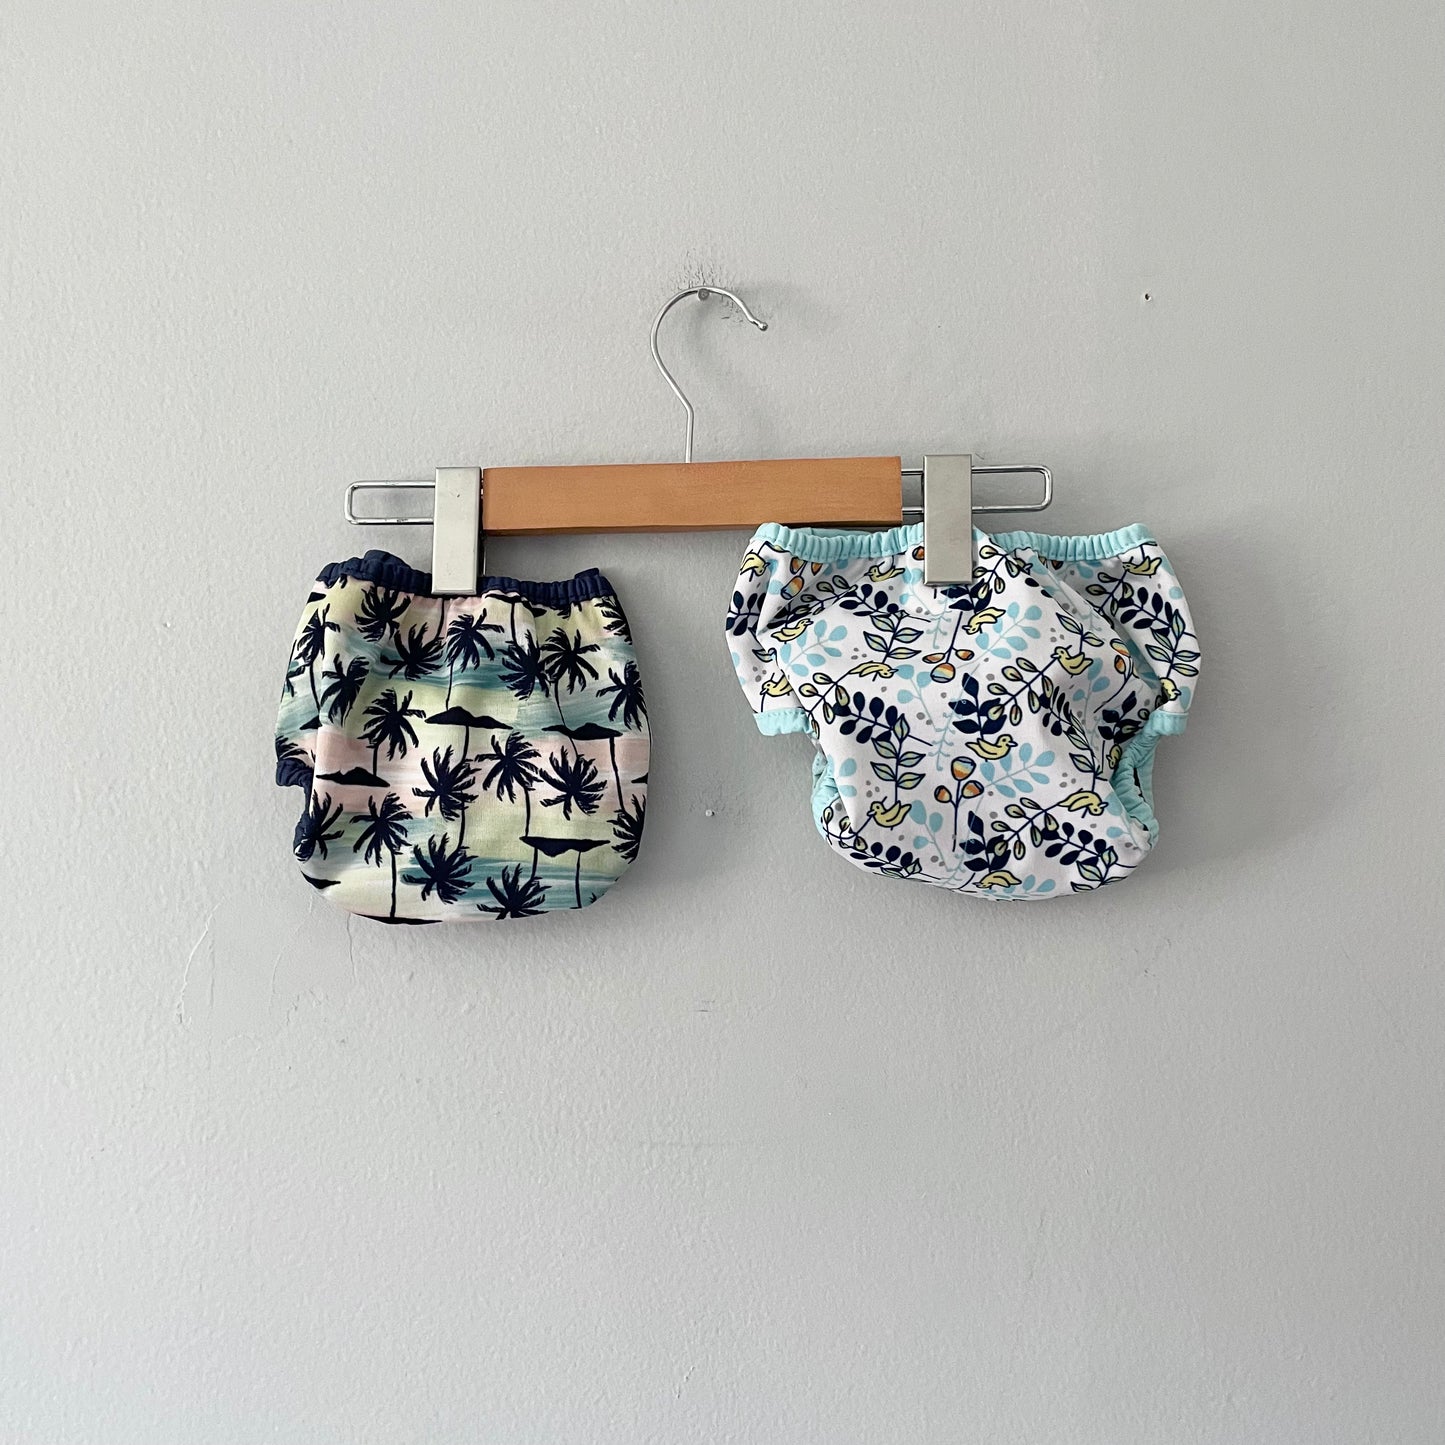 Thirsties / 2 set of diaper covers / One(0-9M)